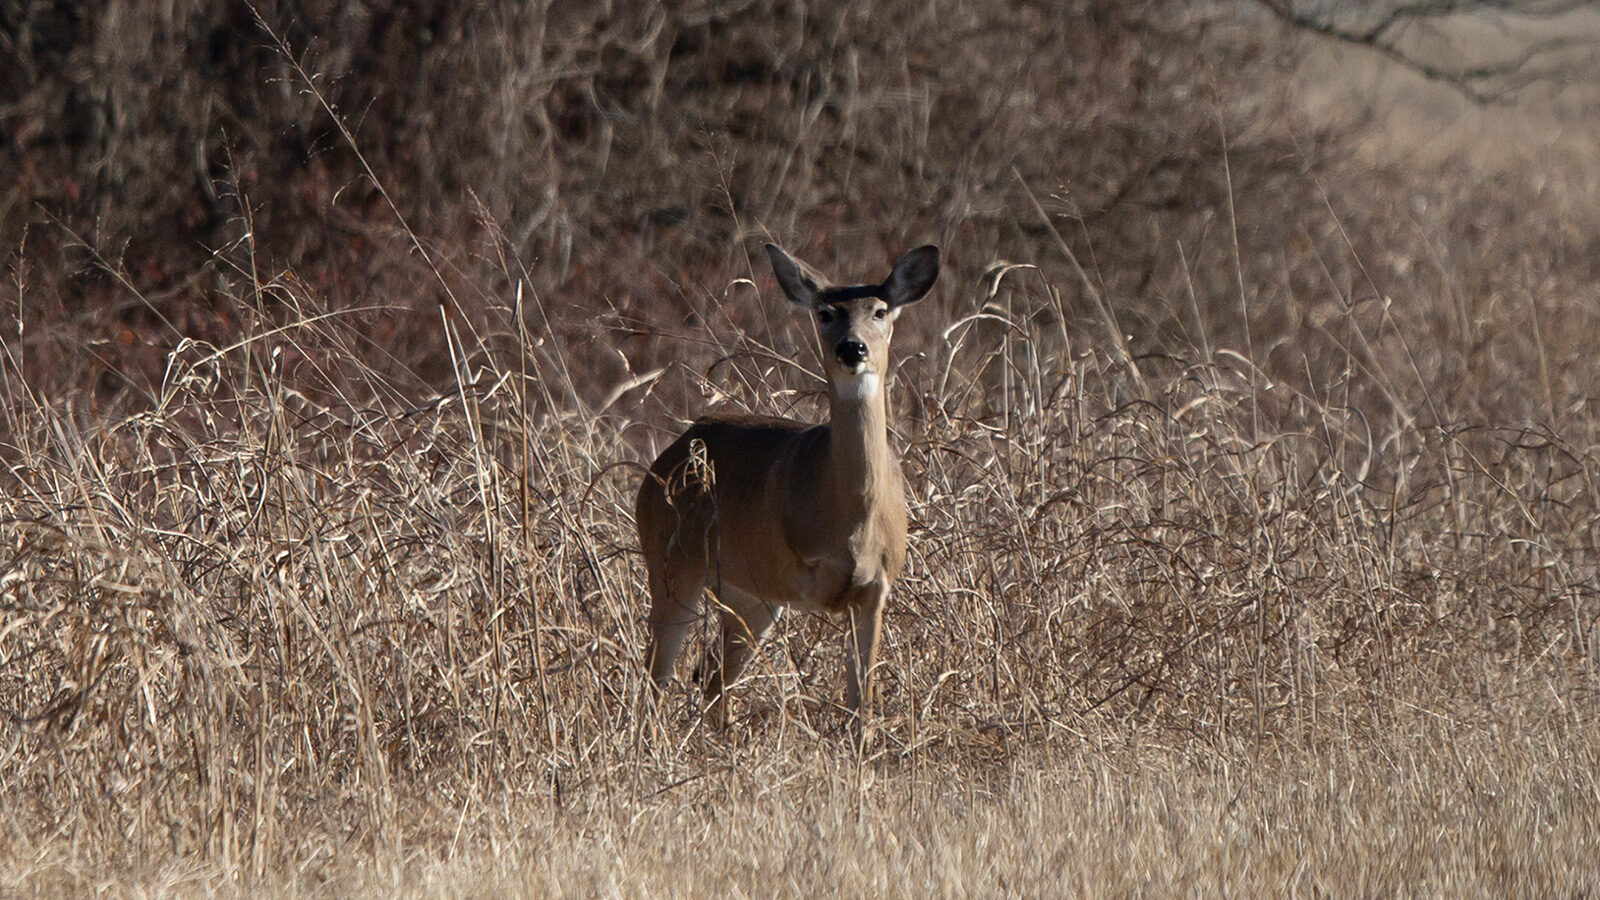 White-tailed deer doe standing in tall grass